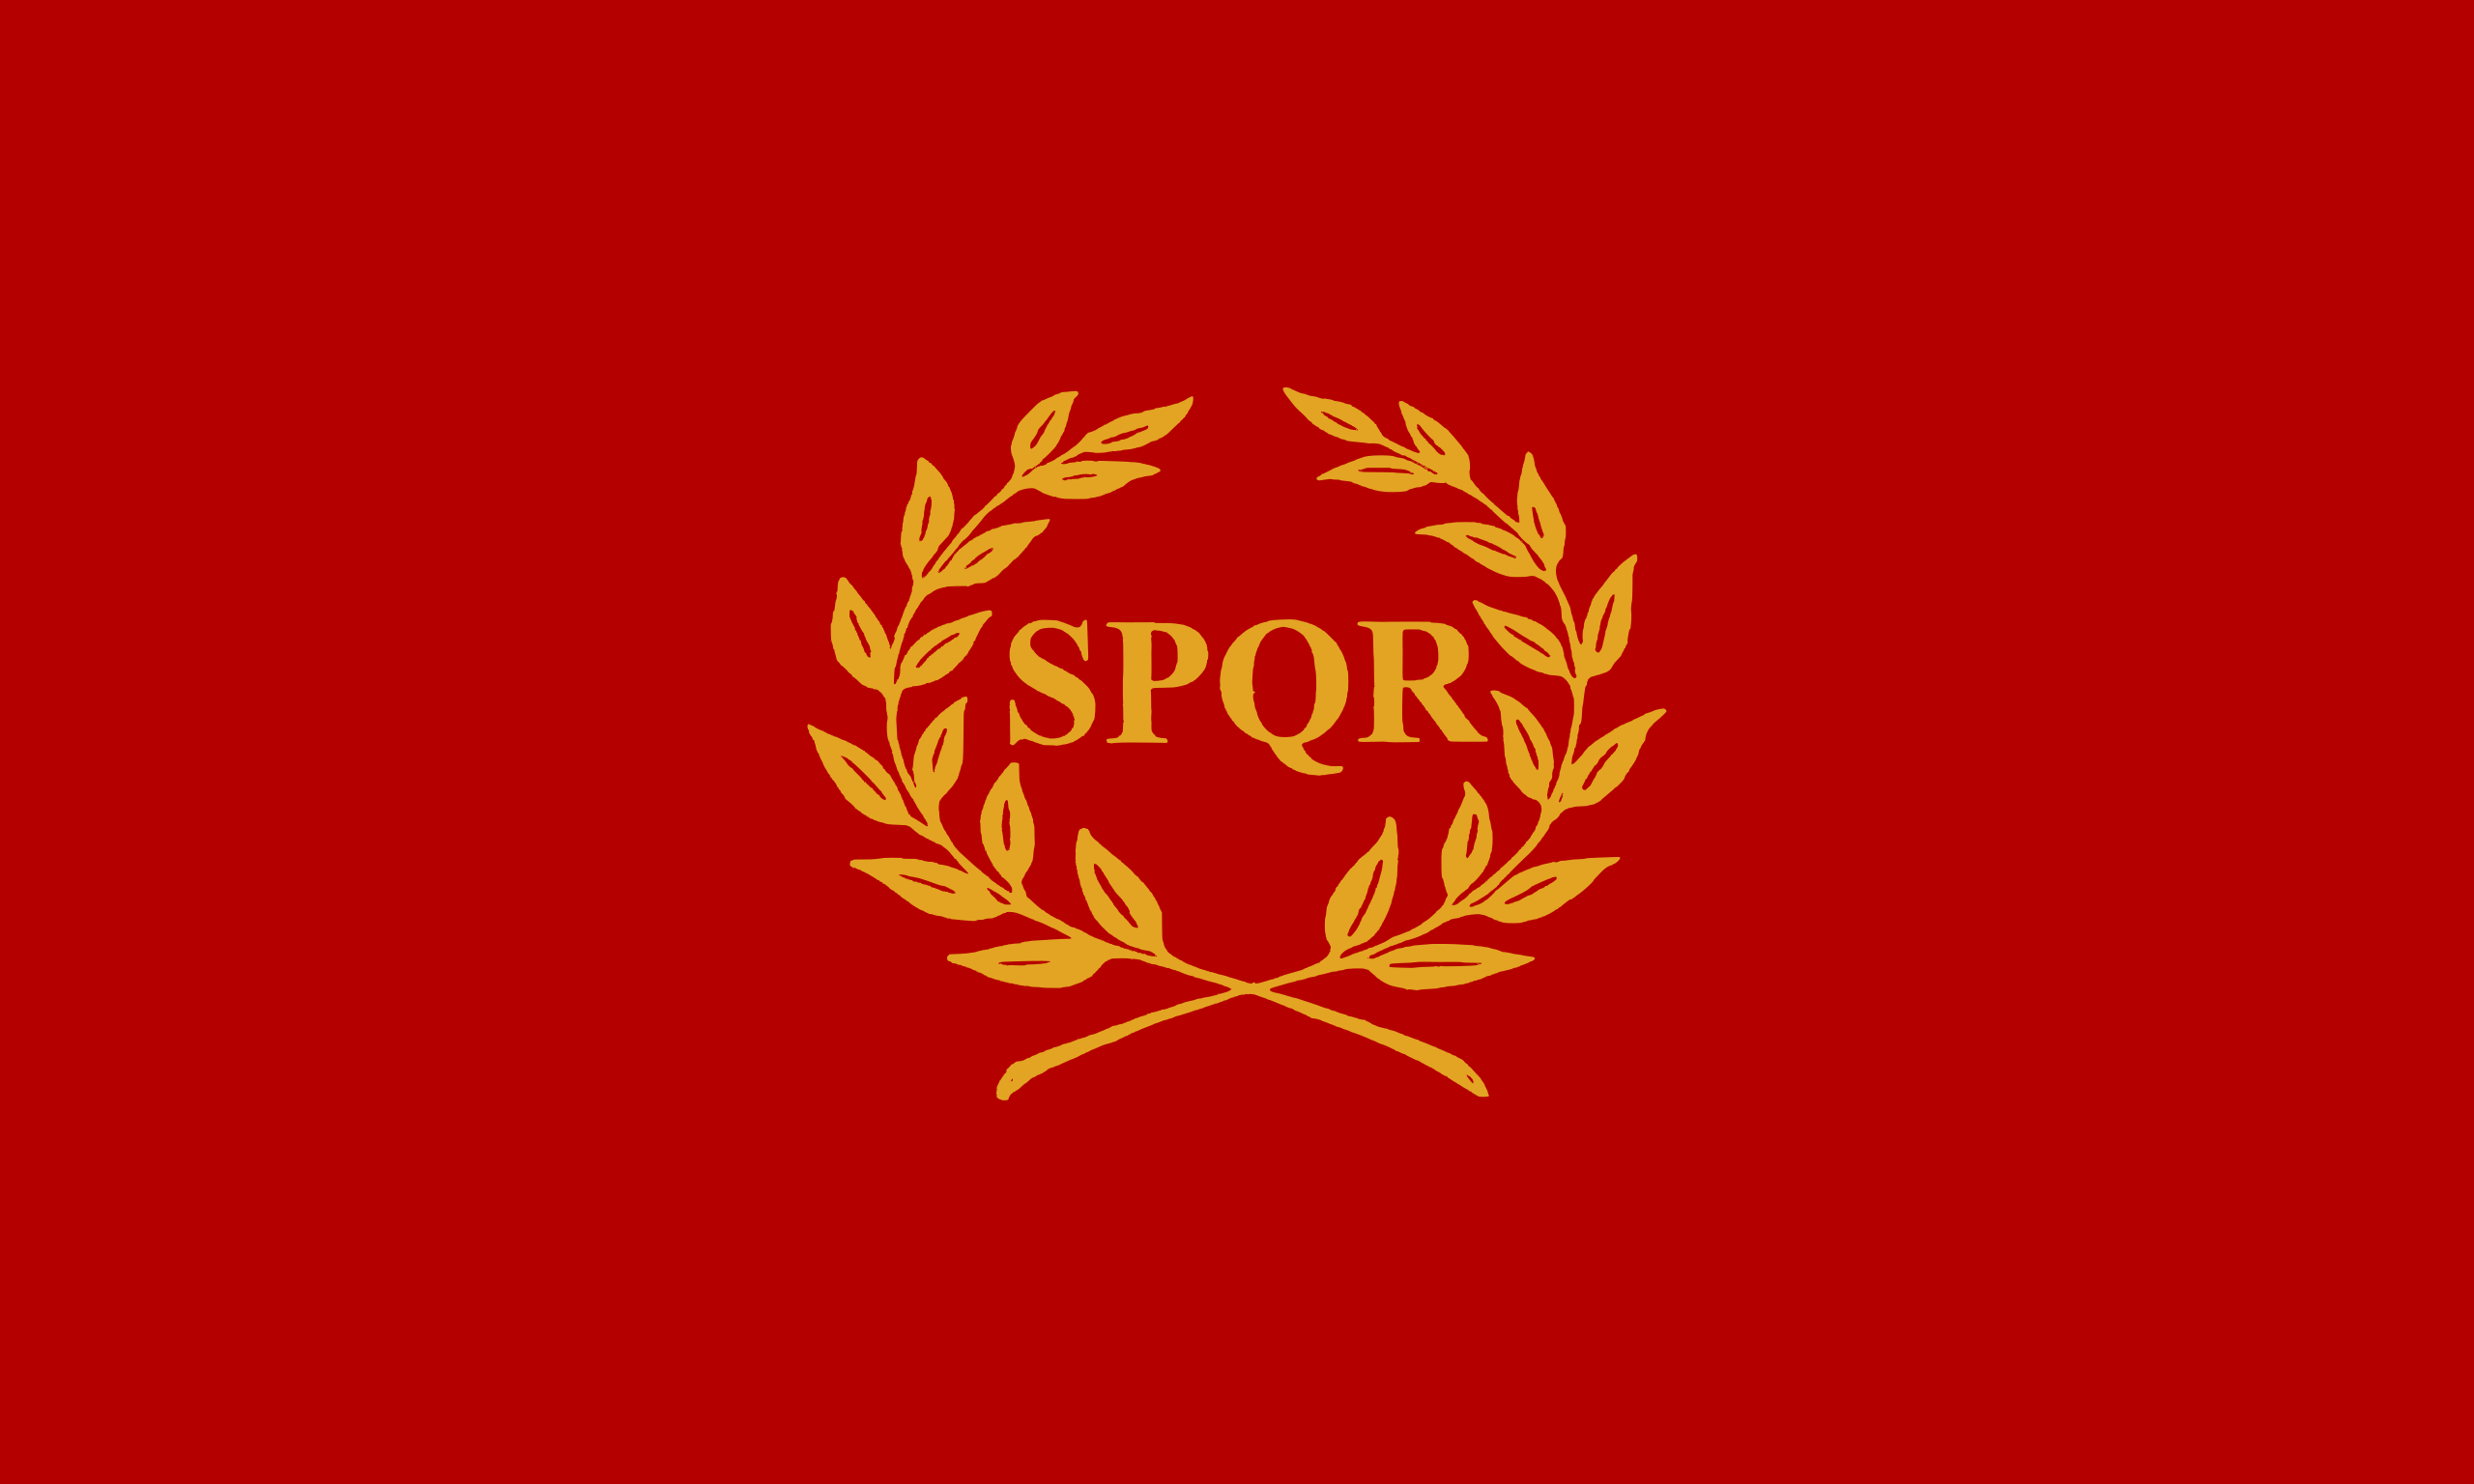 General 2560x1536 flag roman empire simple background red background minimalism